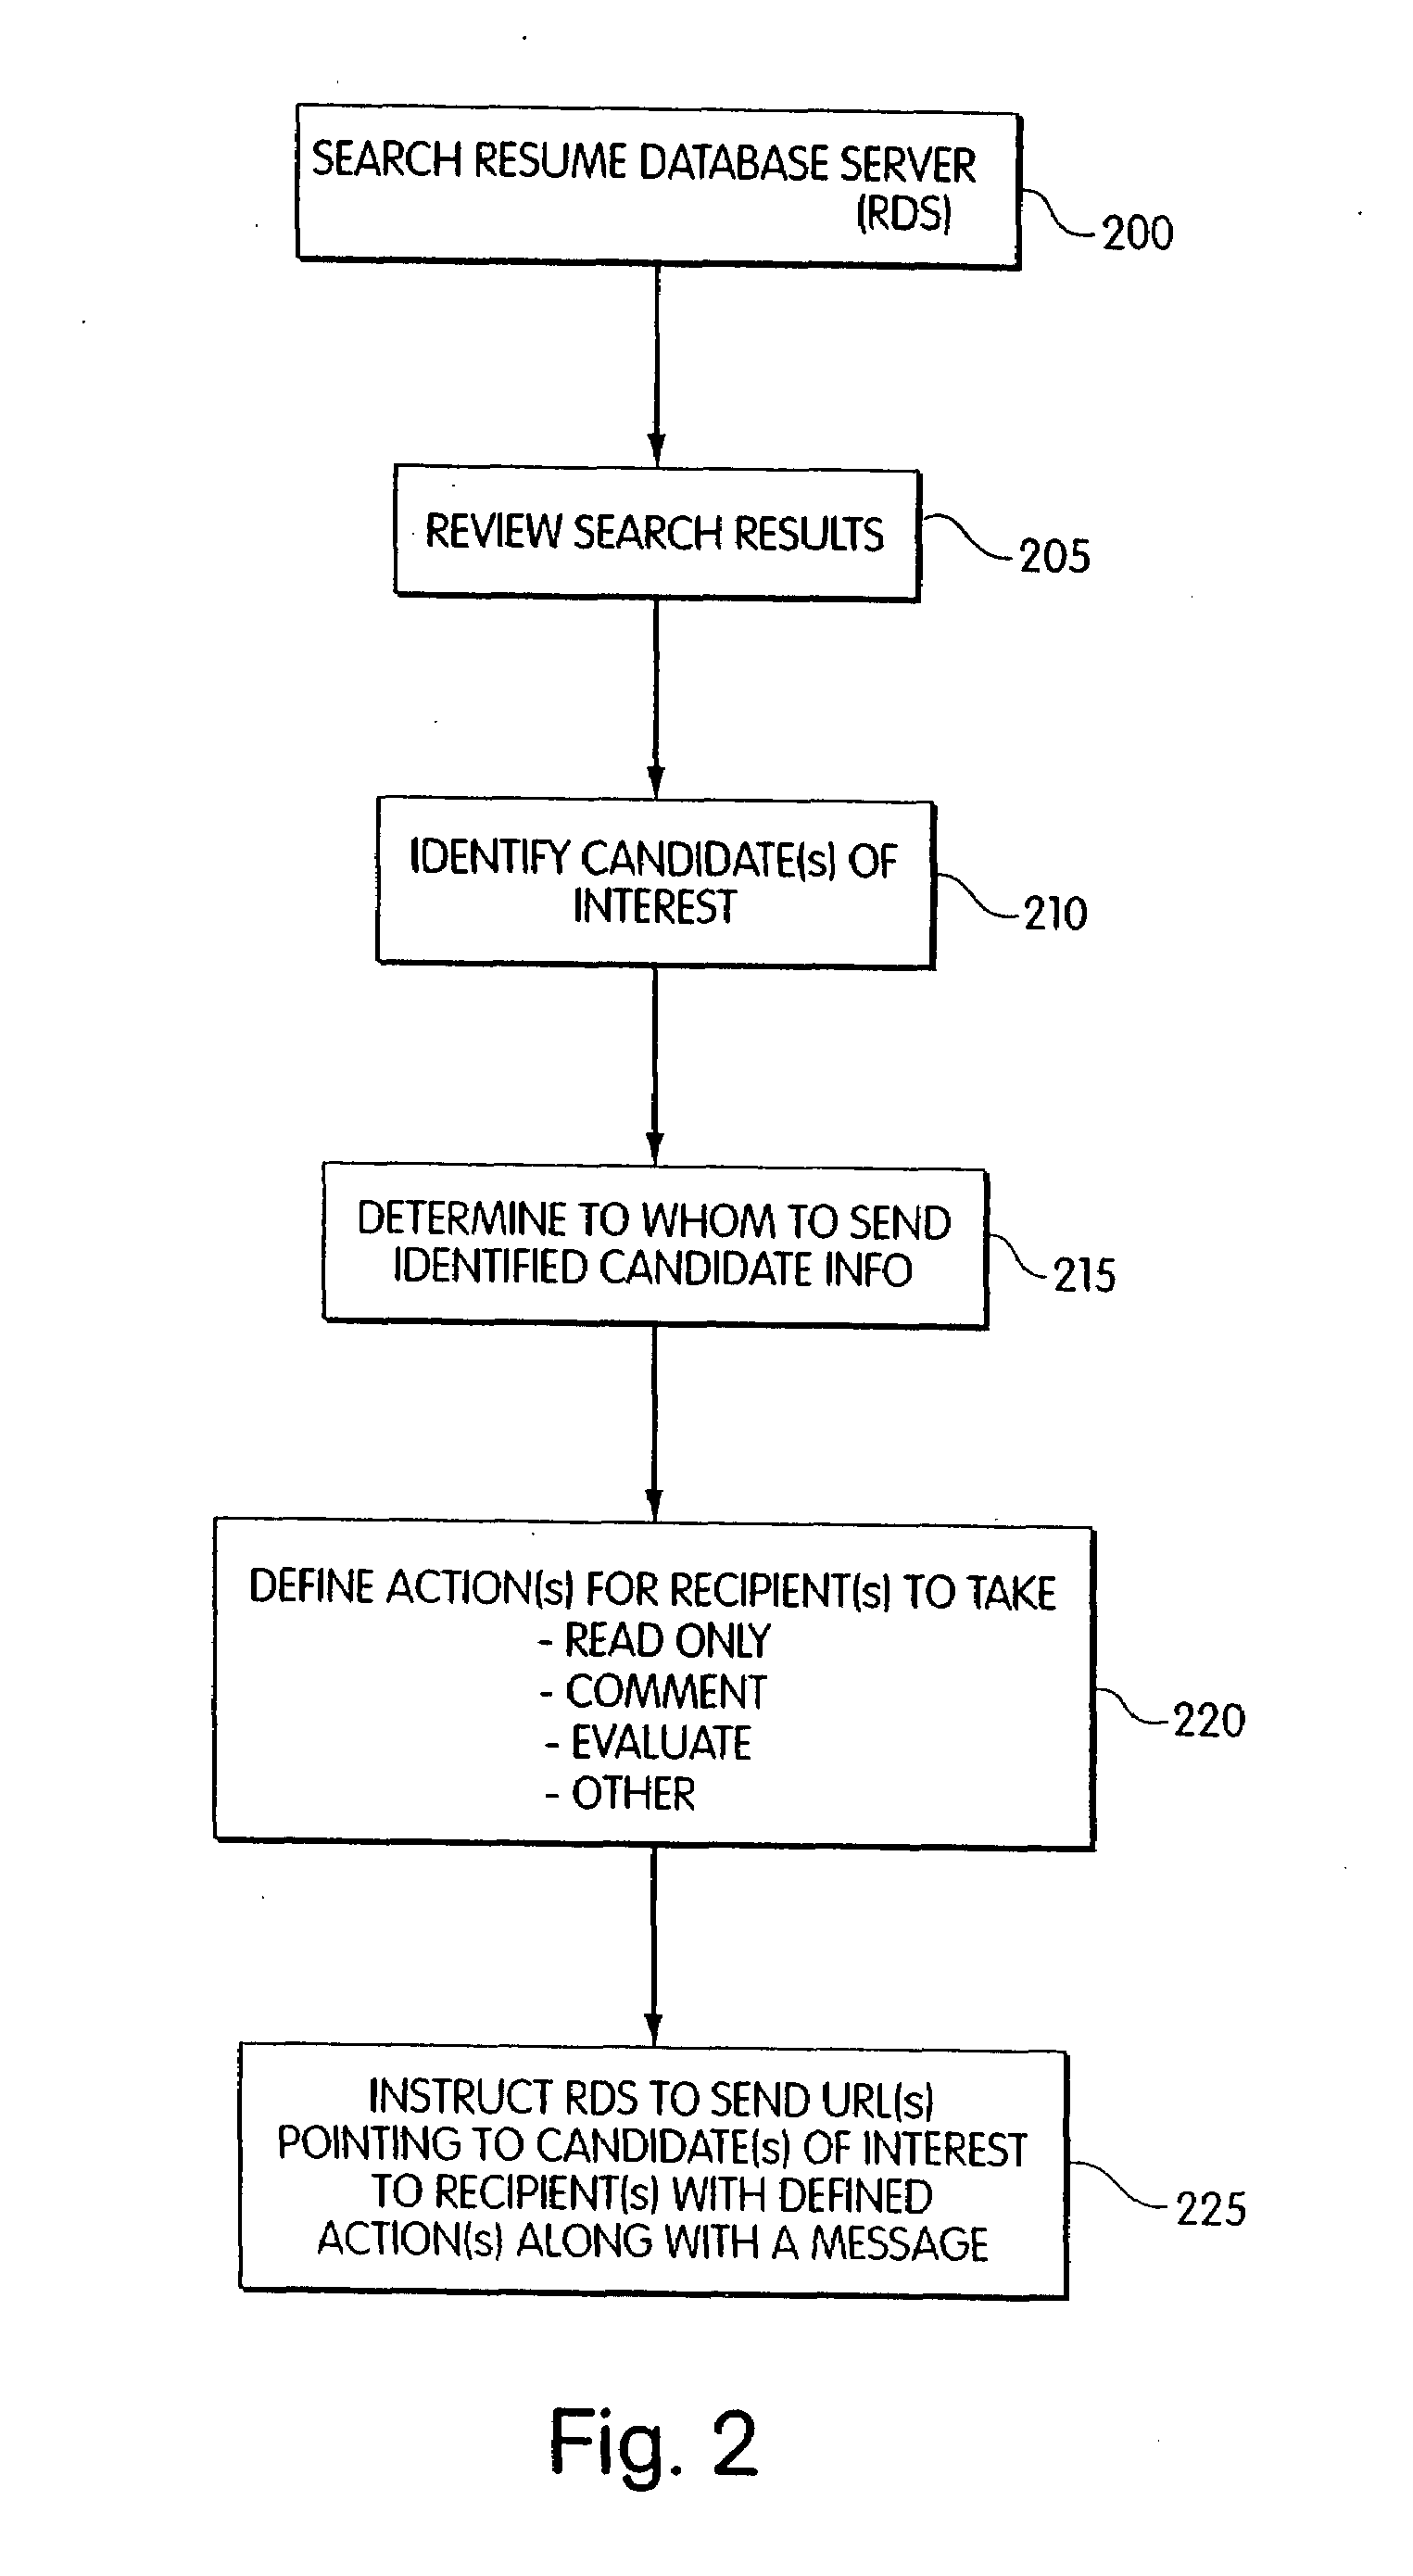 Method and apparatus for sending and tracking resume data sent via URL